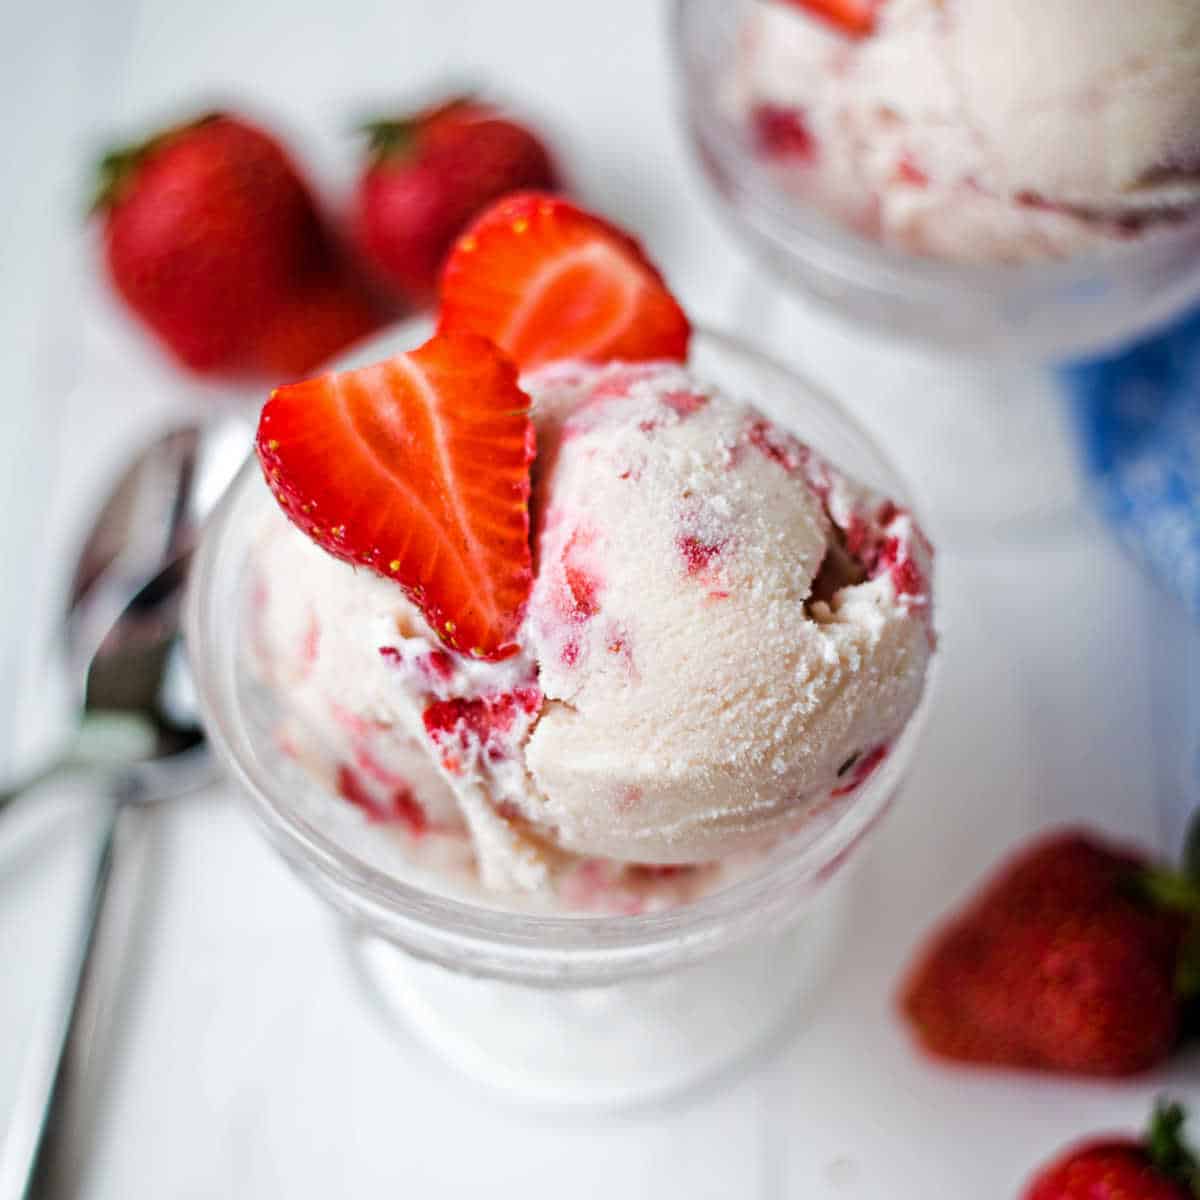 strawberry ice cream topped with strawberries.